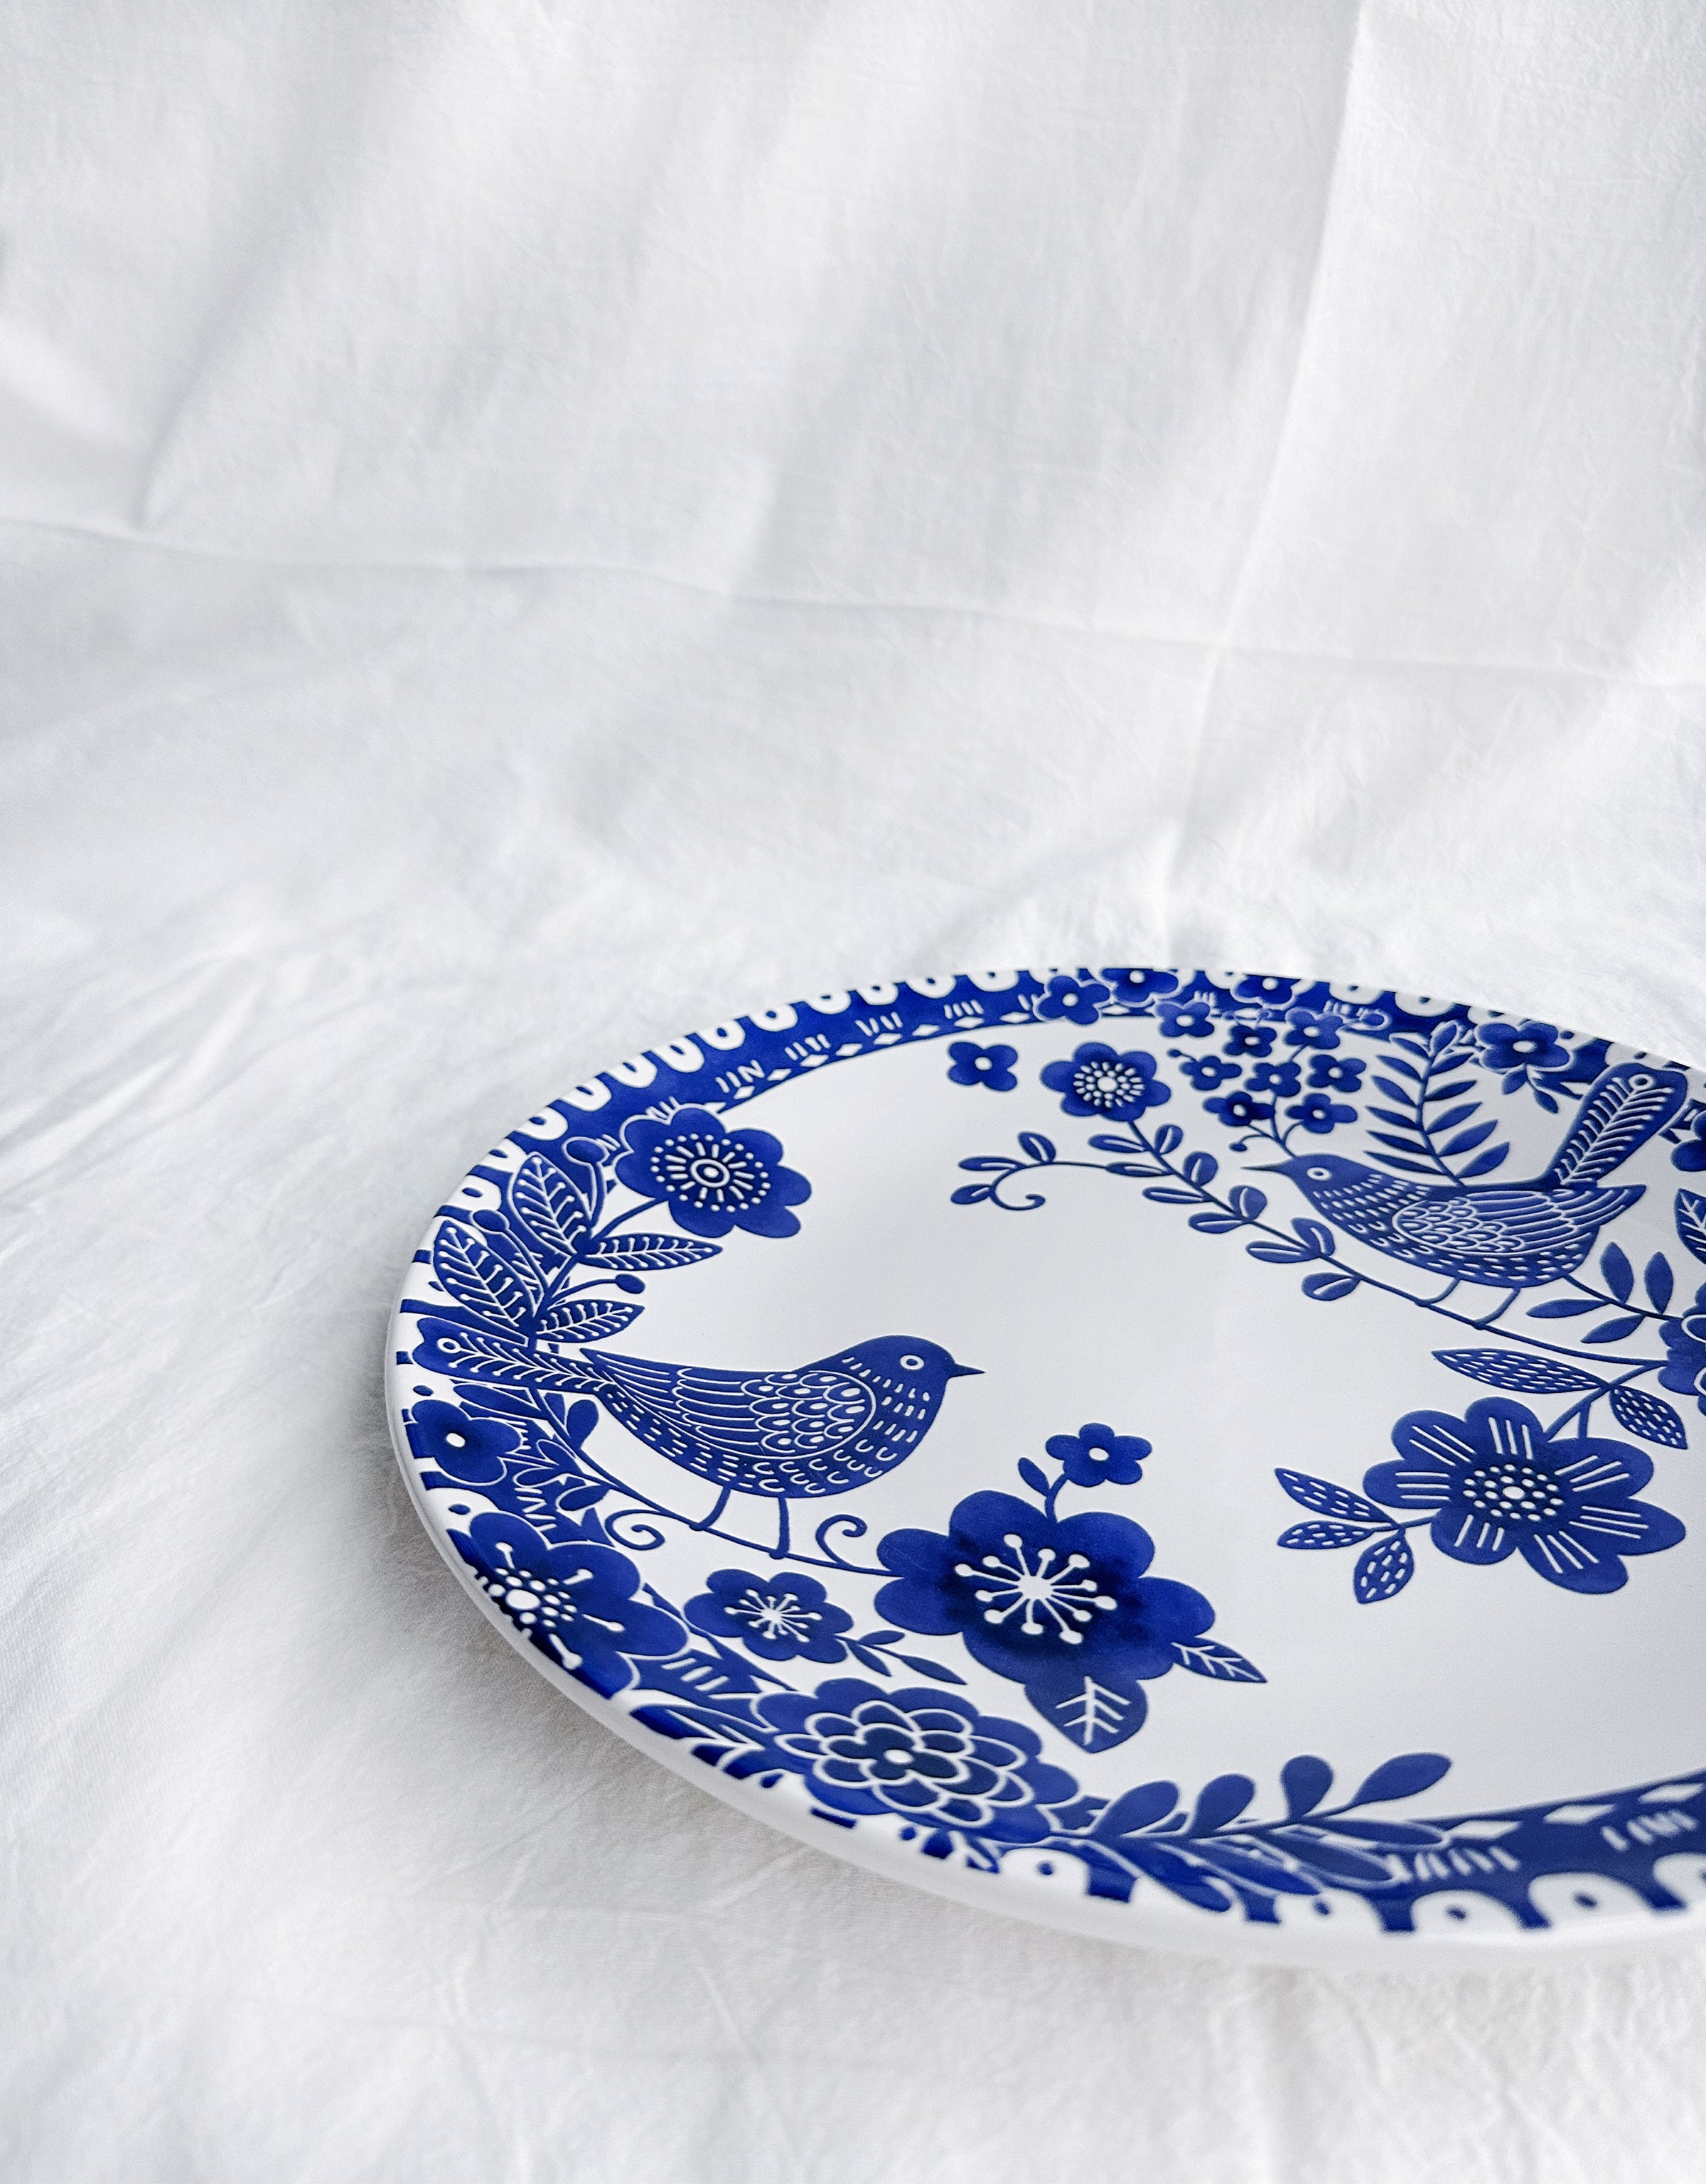 Magpie Paradise Dinner Plates, Set of 4